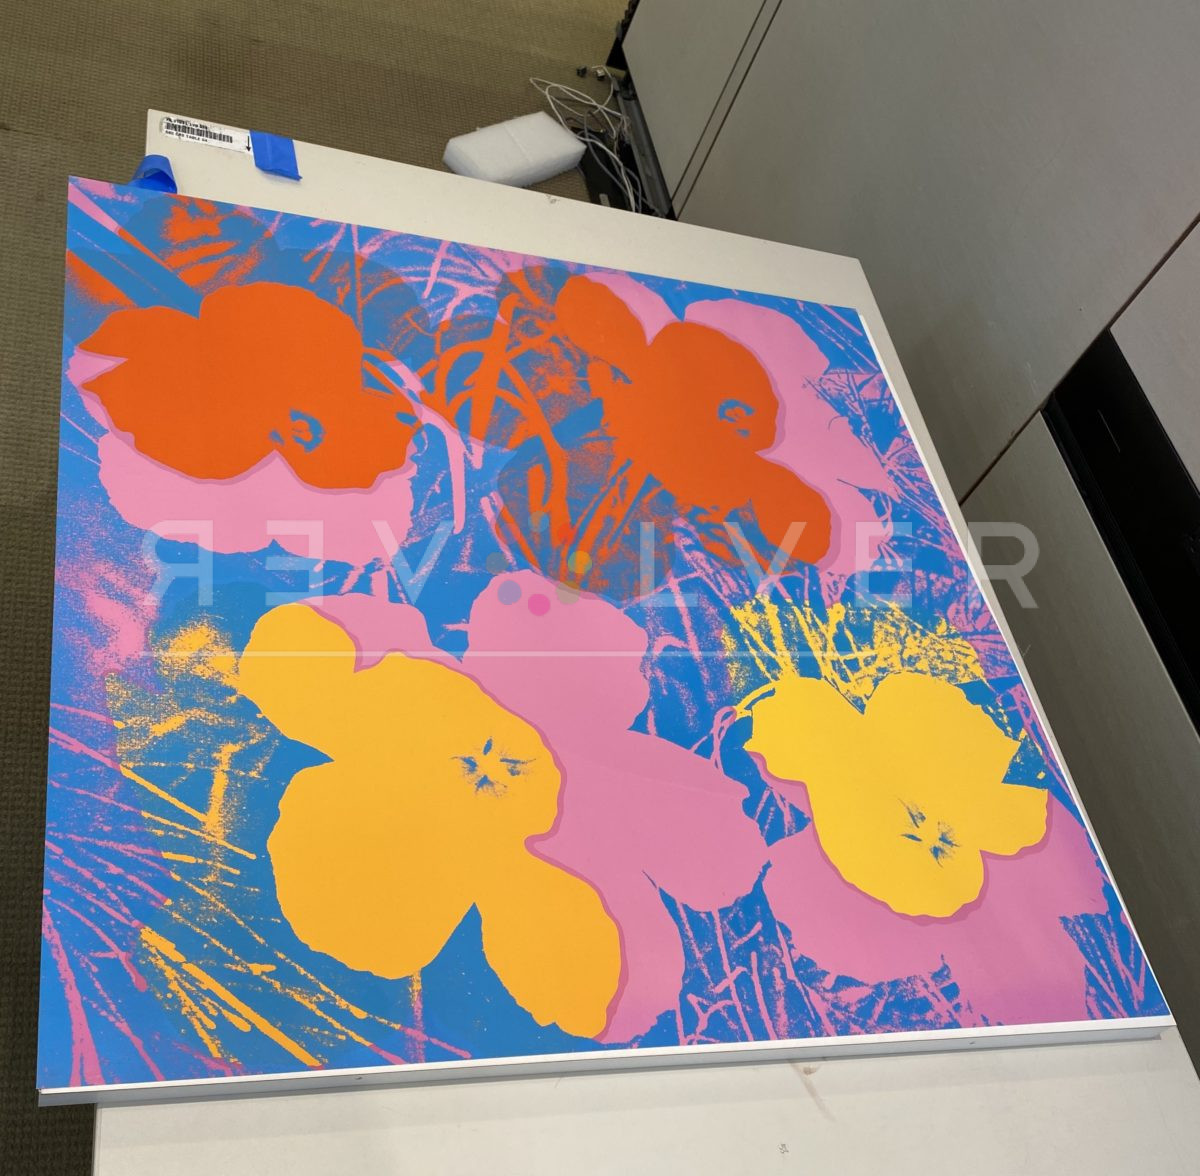 Andy Warhol's Flowers 66 print out of the frame